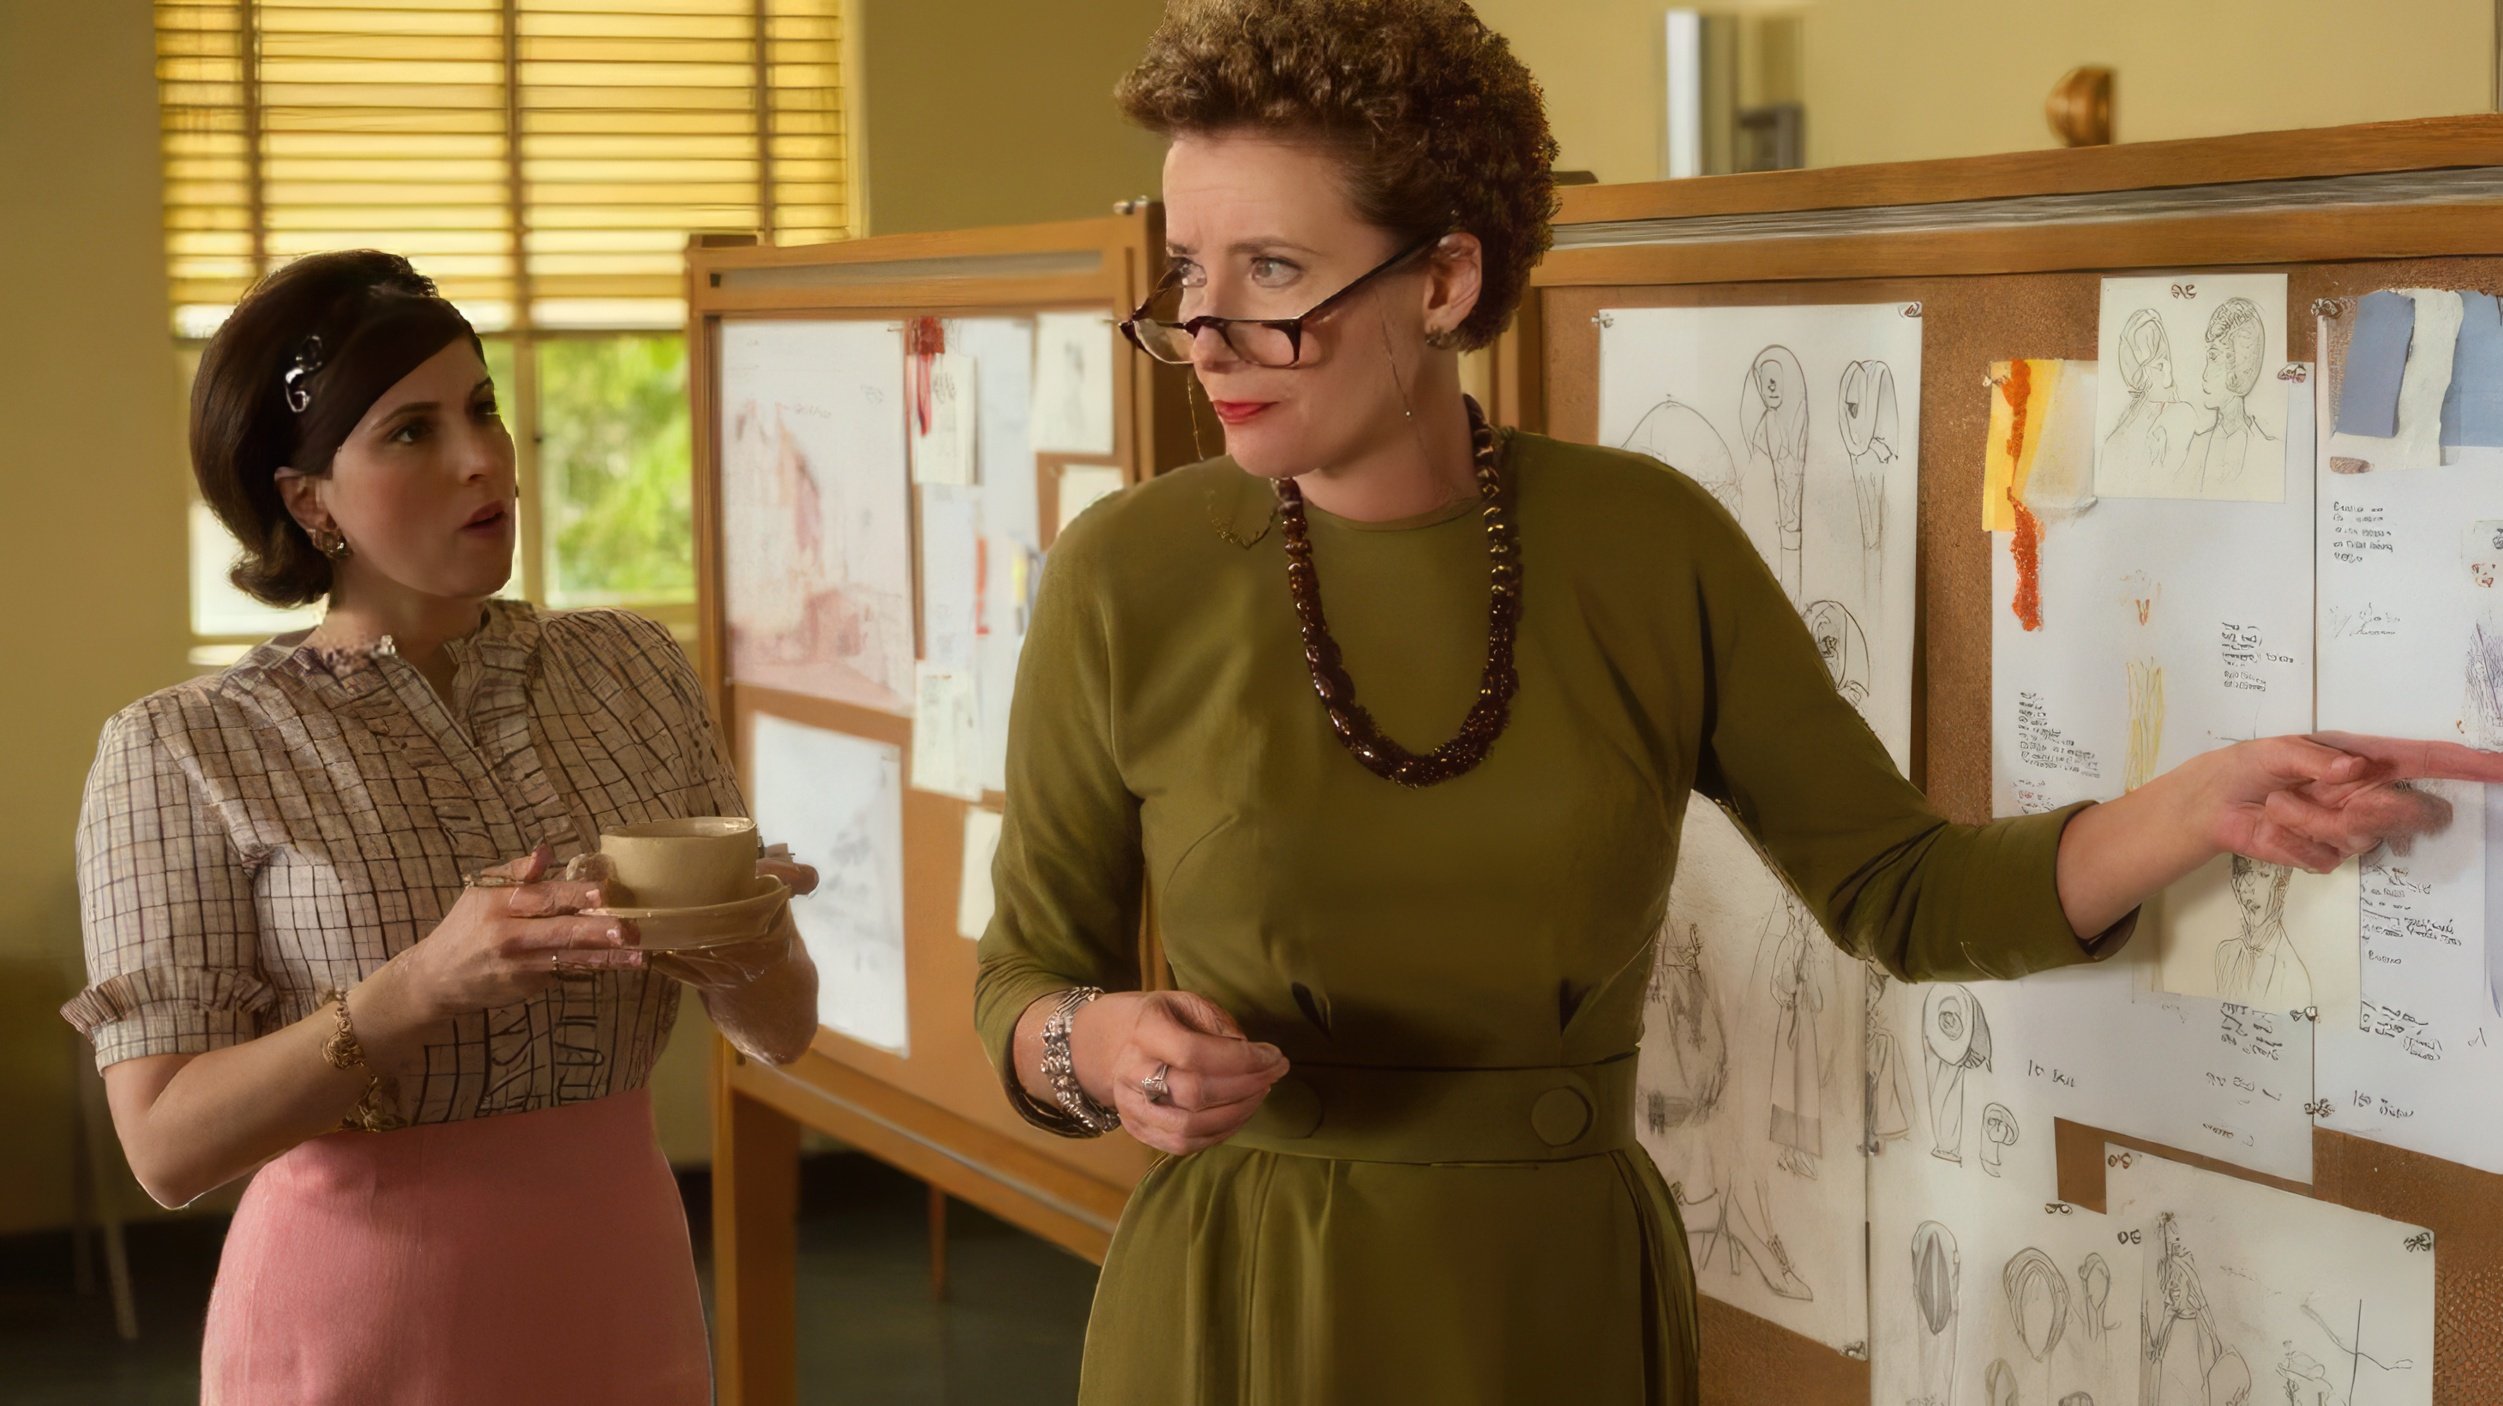 A scene from 'Saving Mr. Banks'